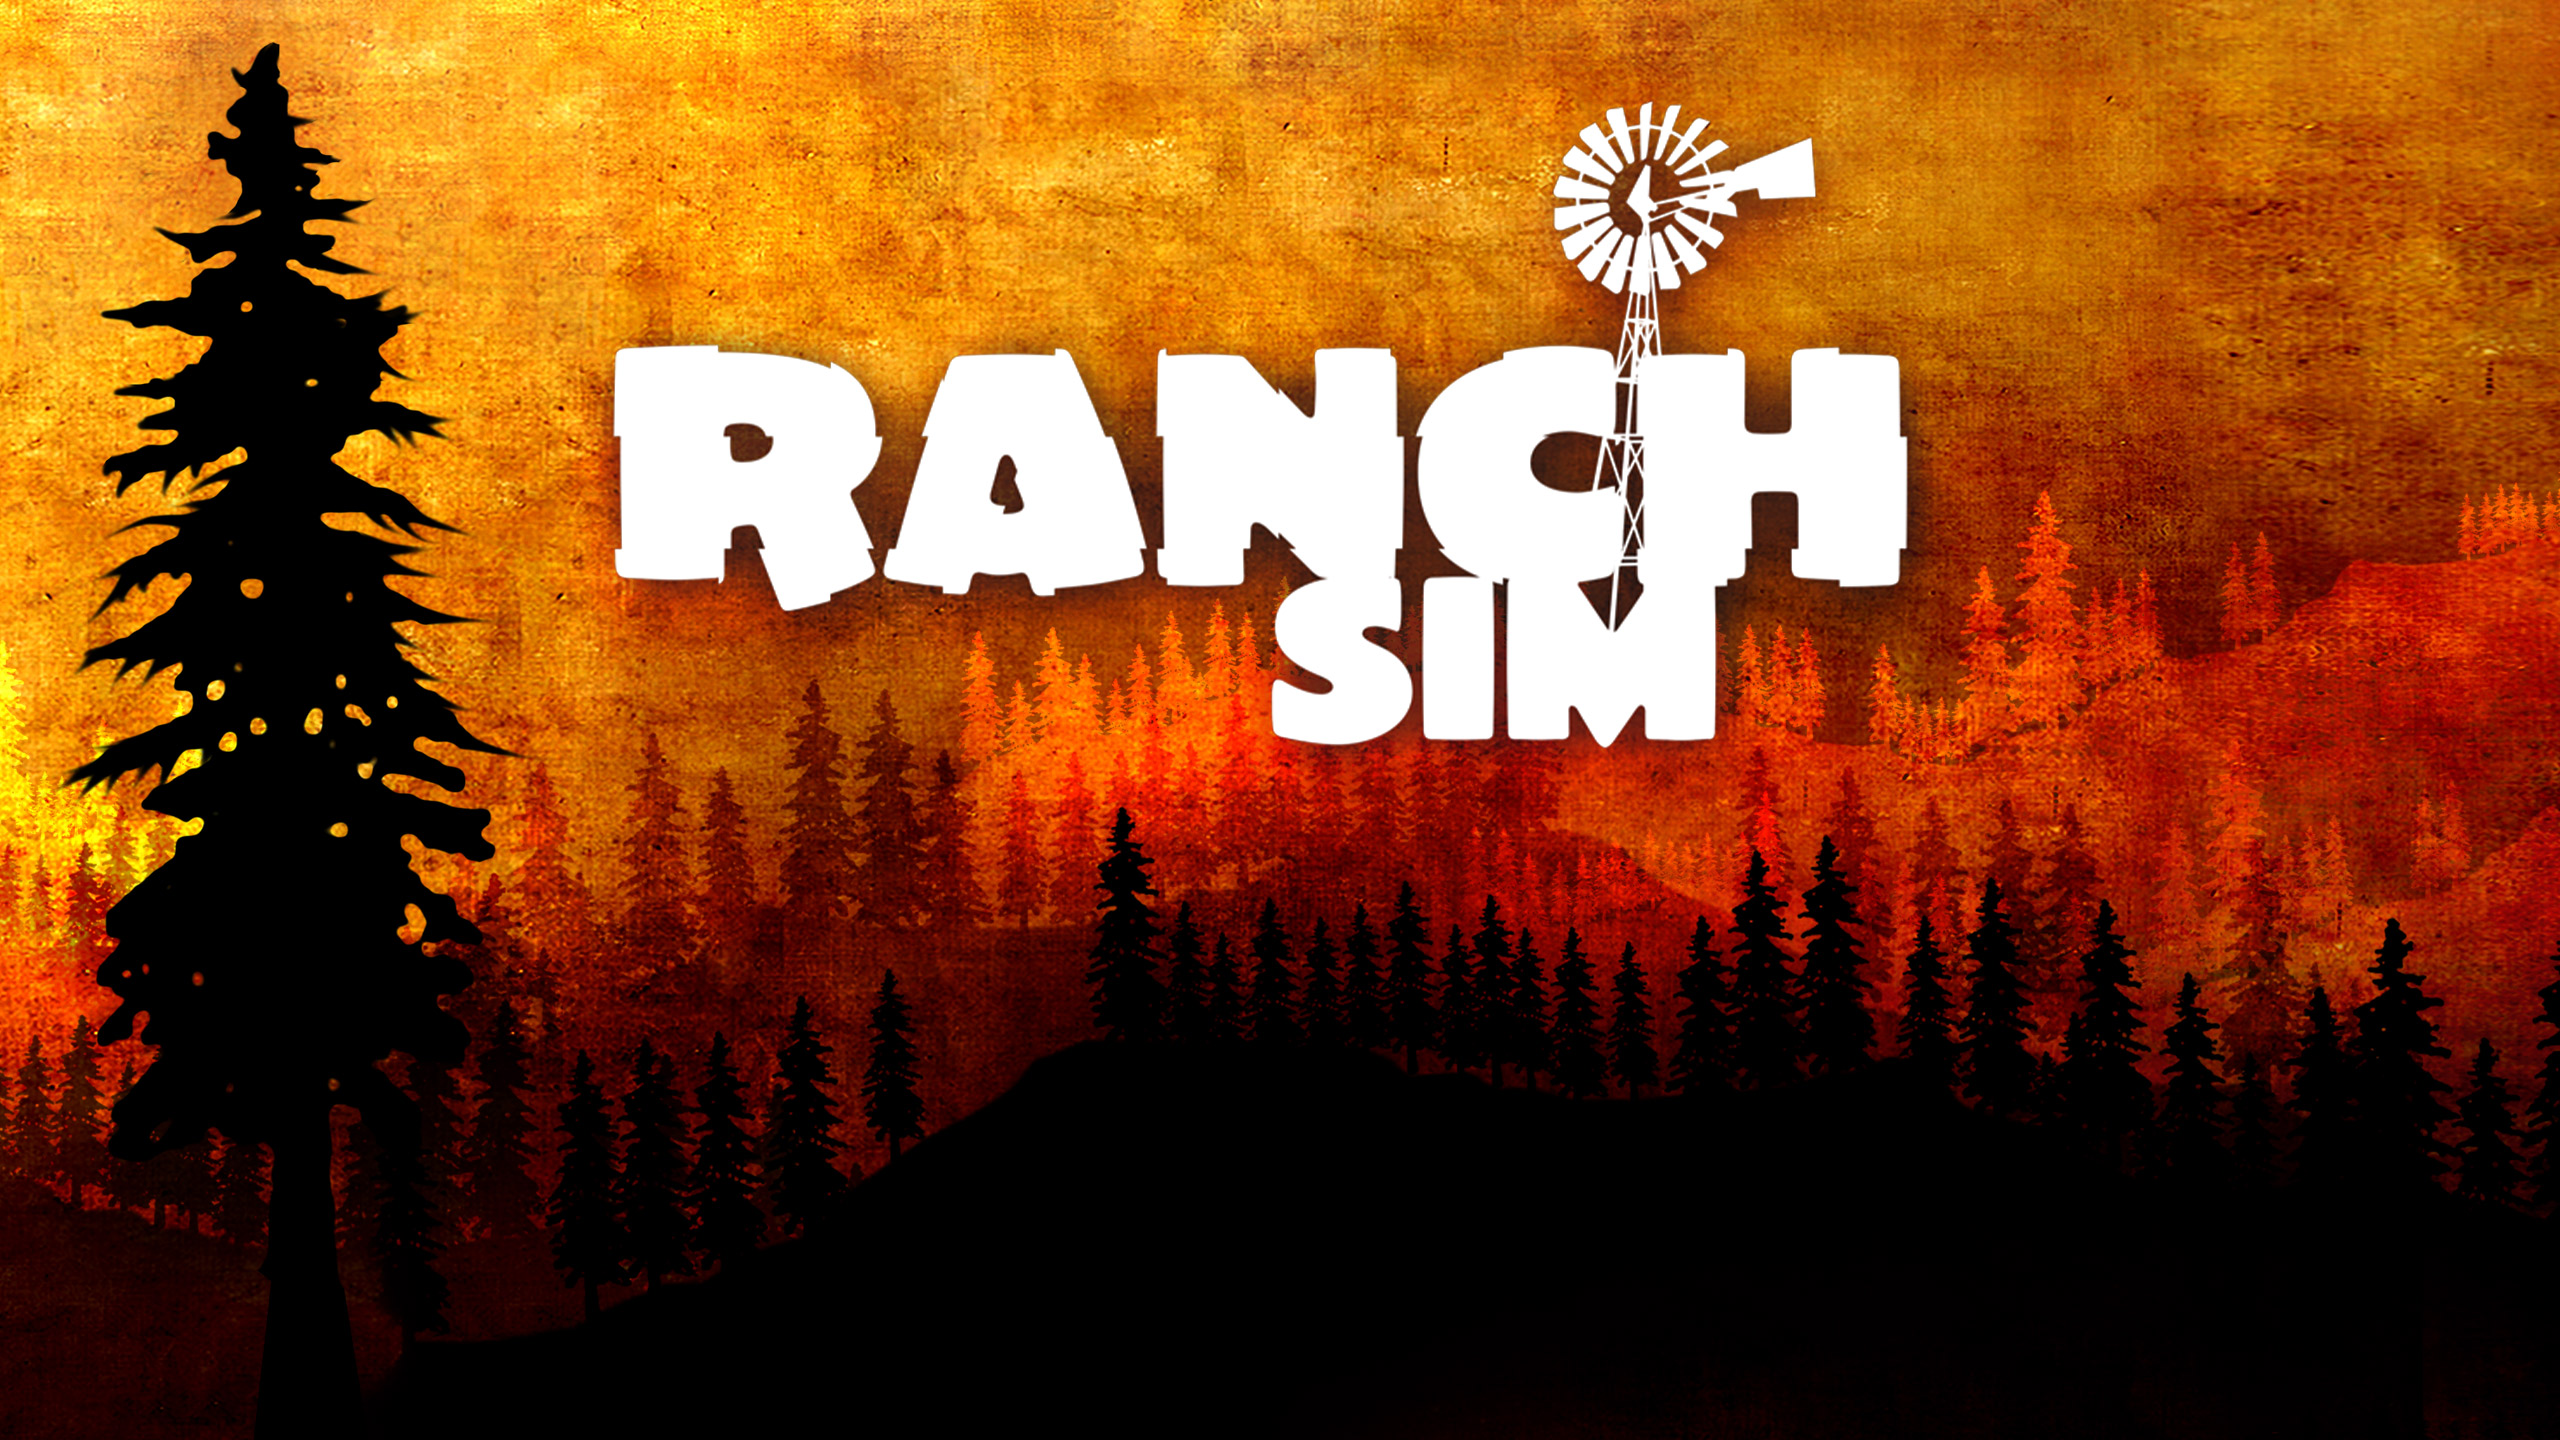 How to download ranch simulator in mobile